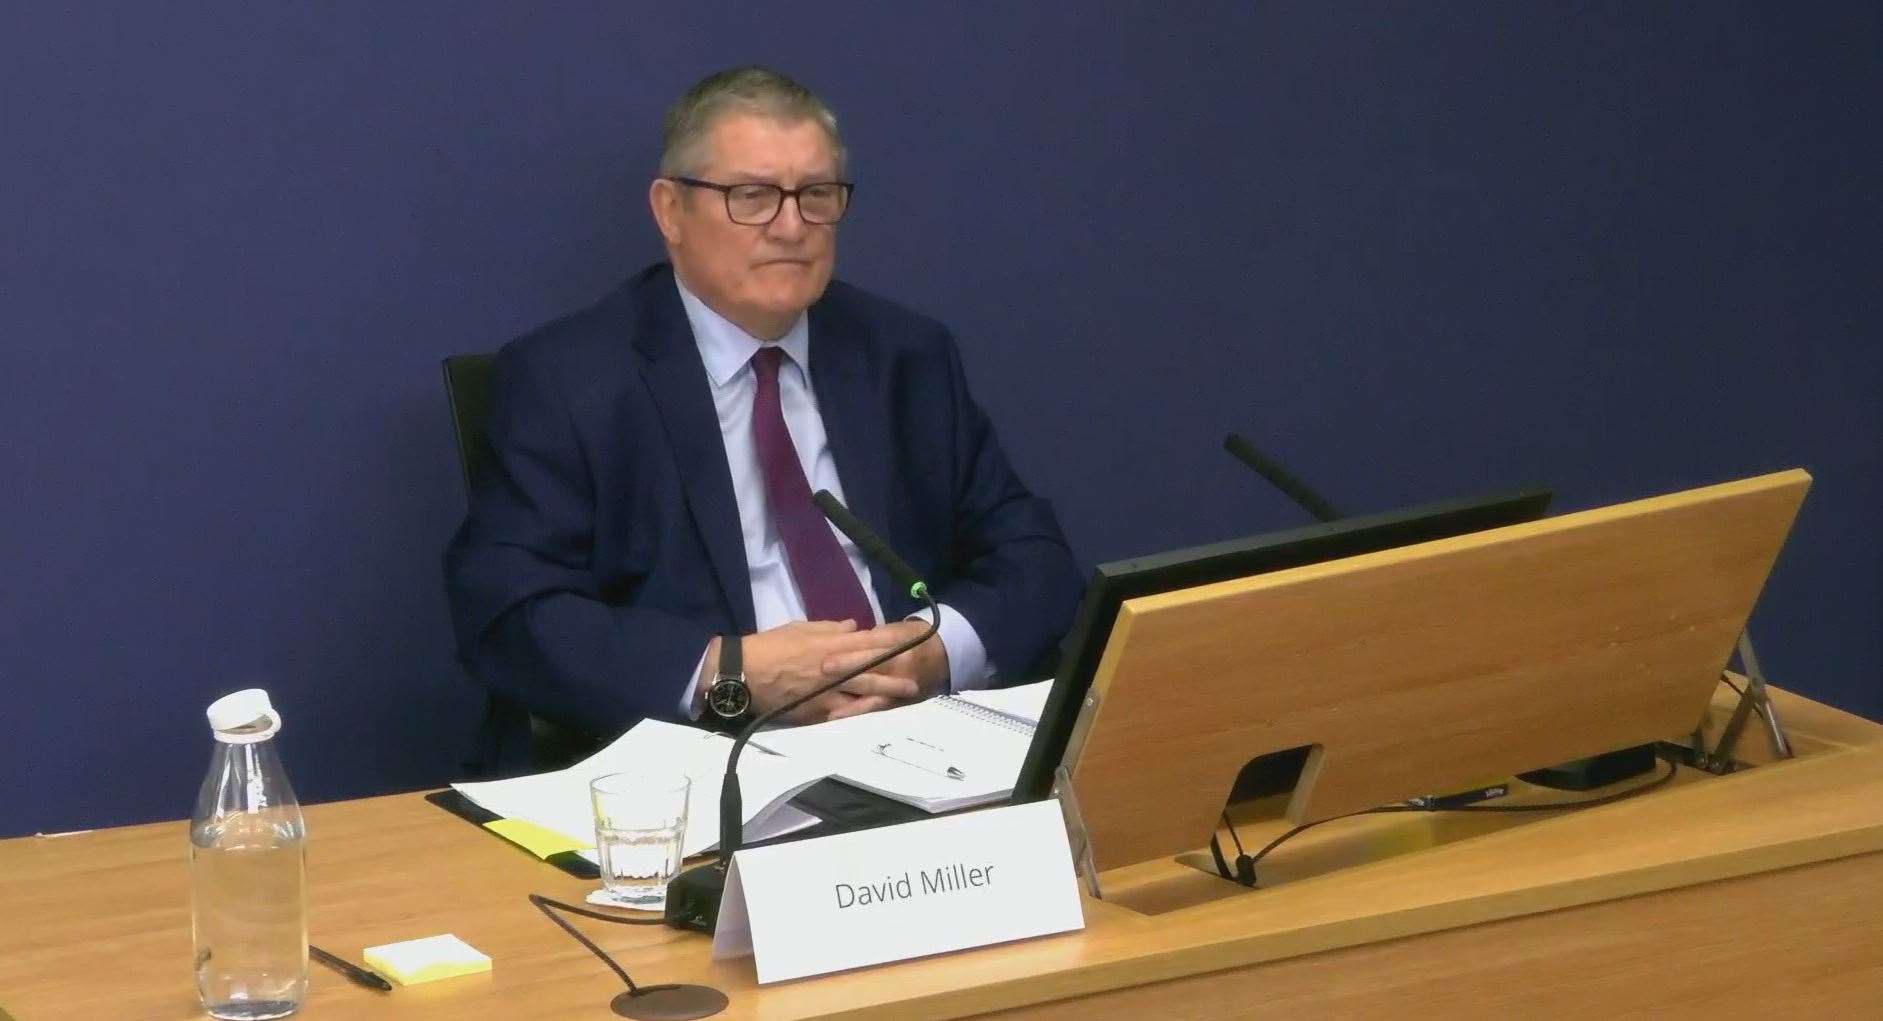 David Miller denied saying the words during his evidence to the inquiry (Post Office Horizon IT Inquiry/PA)